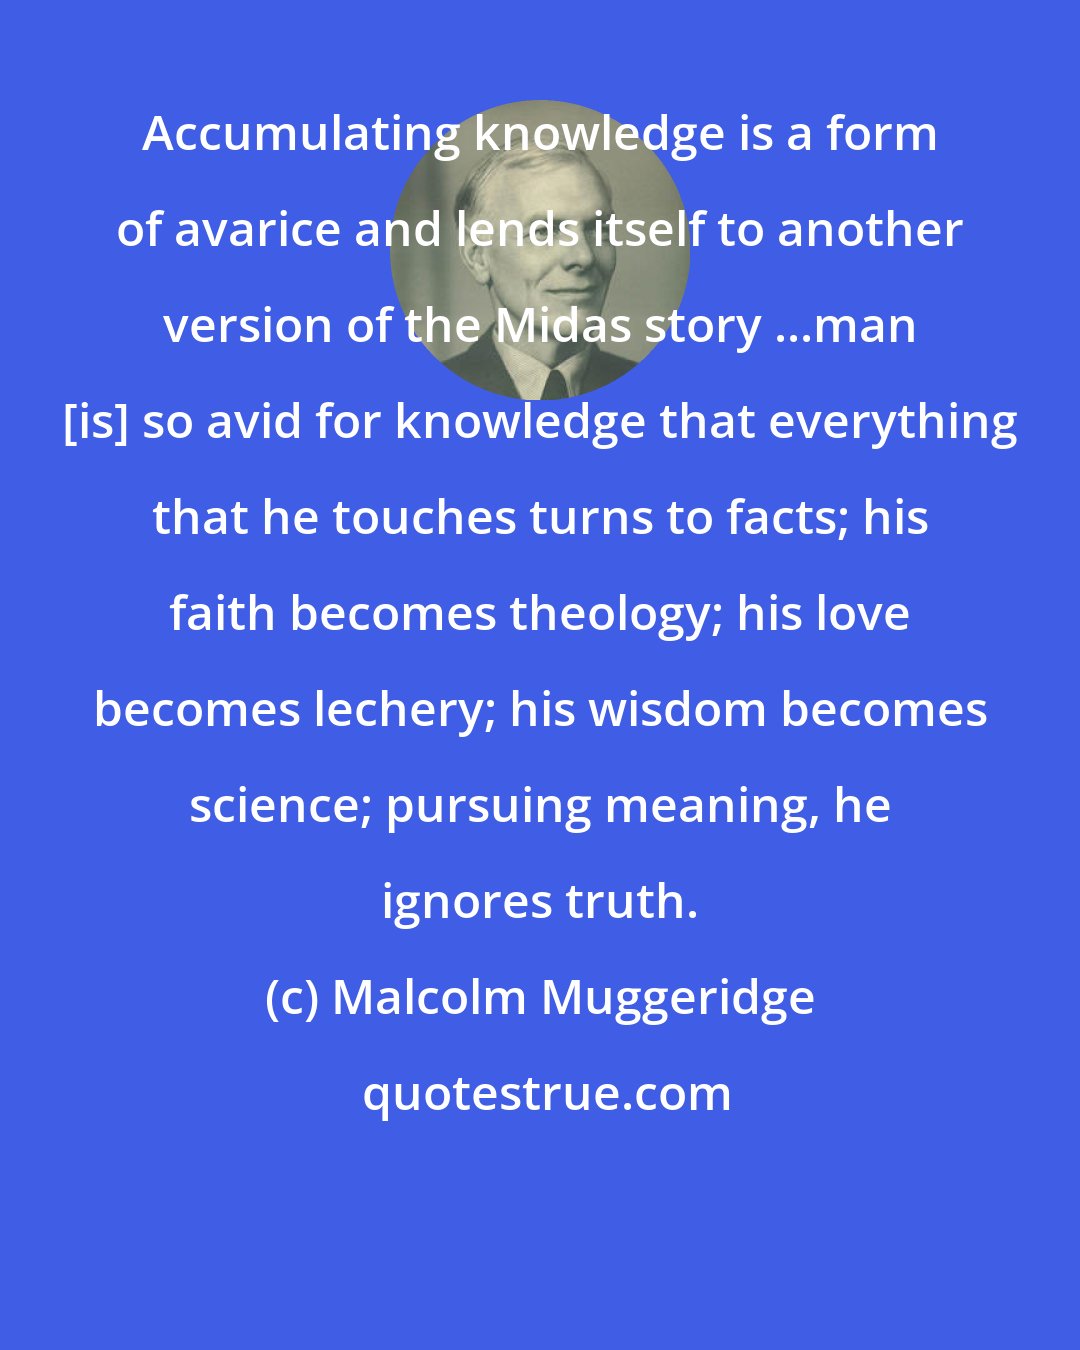 Malcolm Muggeridge: Accumulating knowledge is a form of avarice and lends itself to another version of the Midas story ...man [is] so avid for knowledge that everything that he touches turns to facts; his faith becomes theology; his love becomes lechery; his wisdom becomes science; pursuing meaning, he ignores truth.